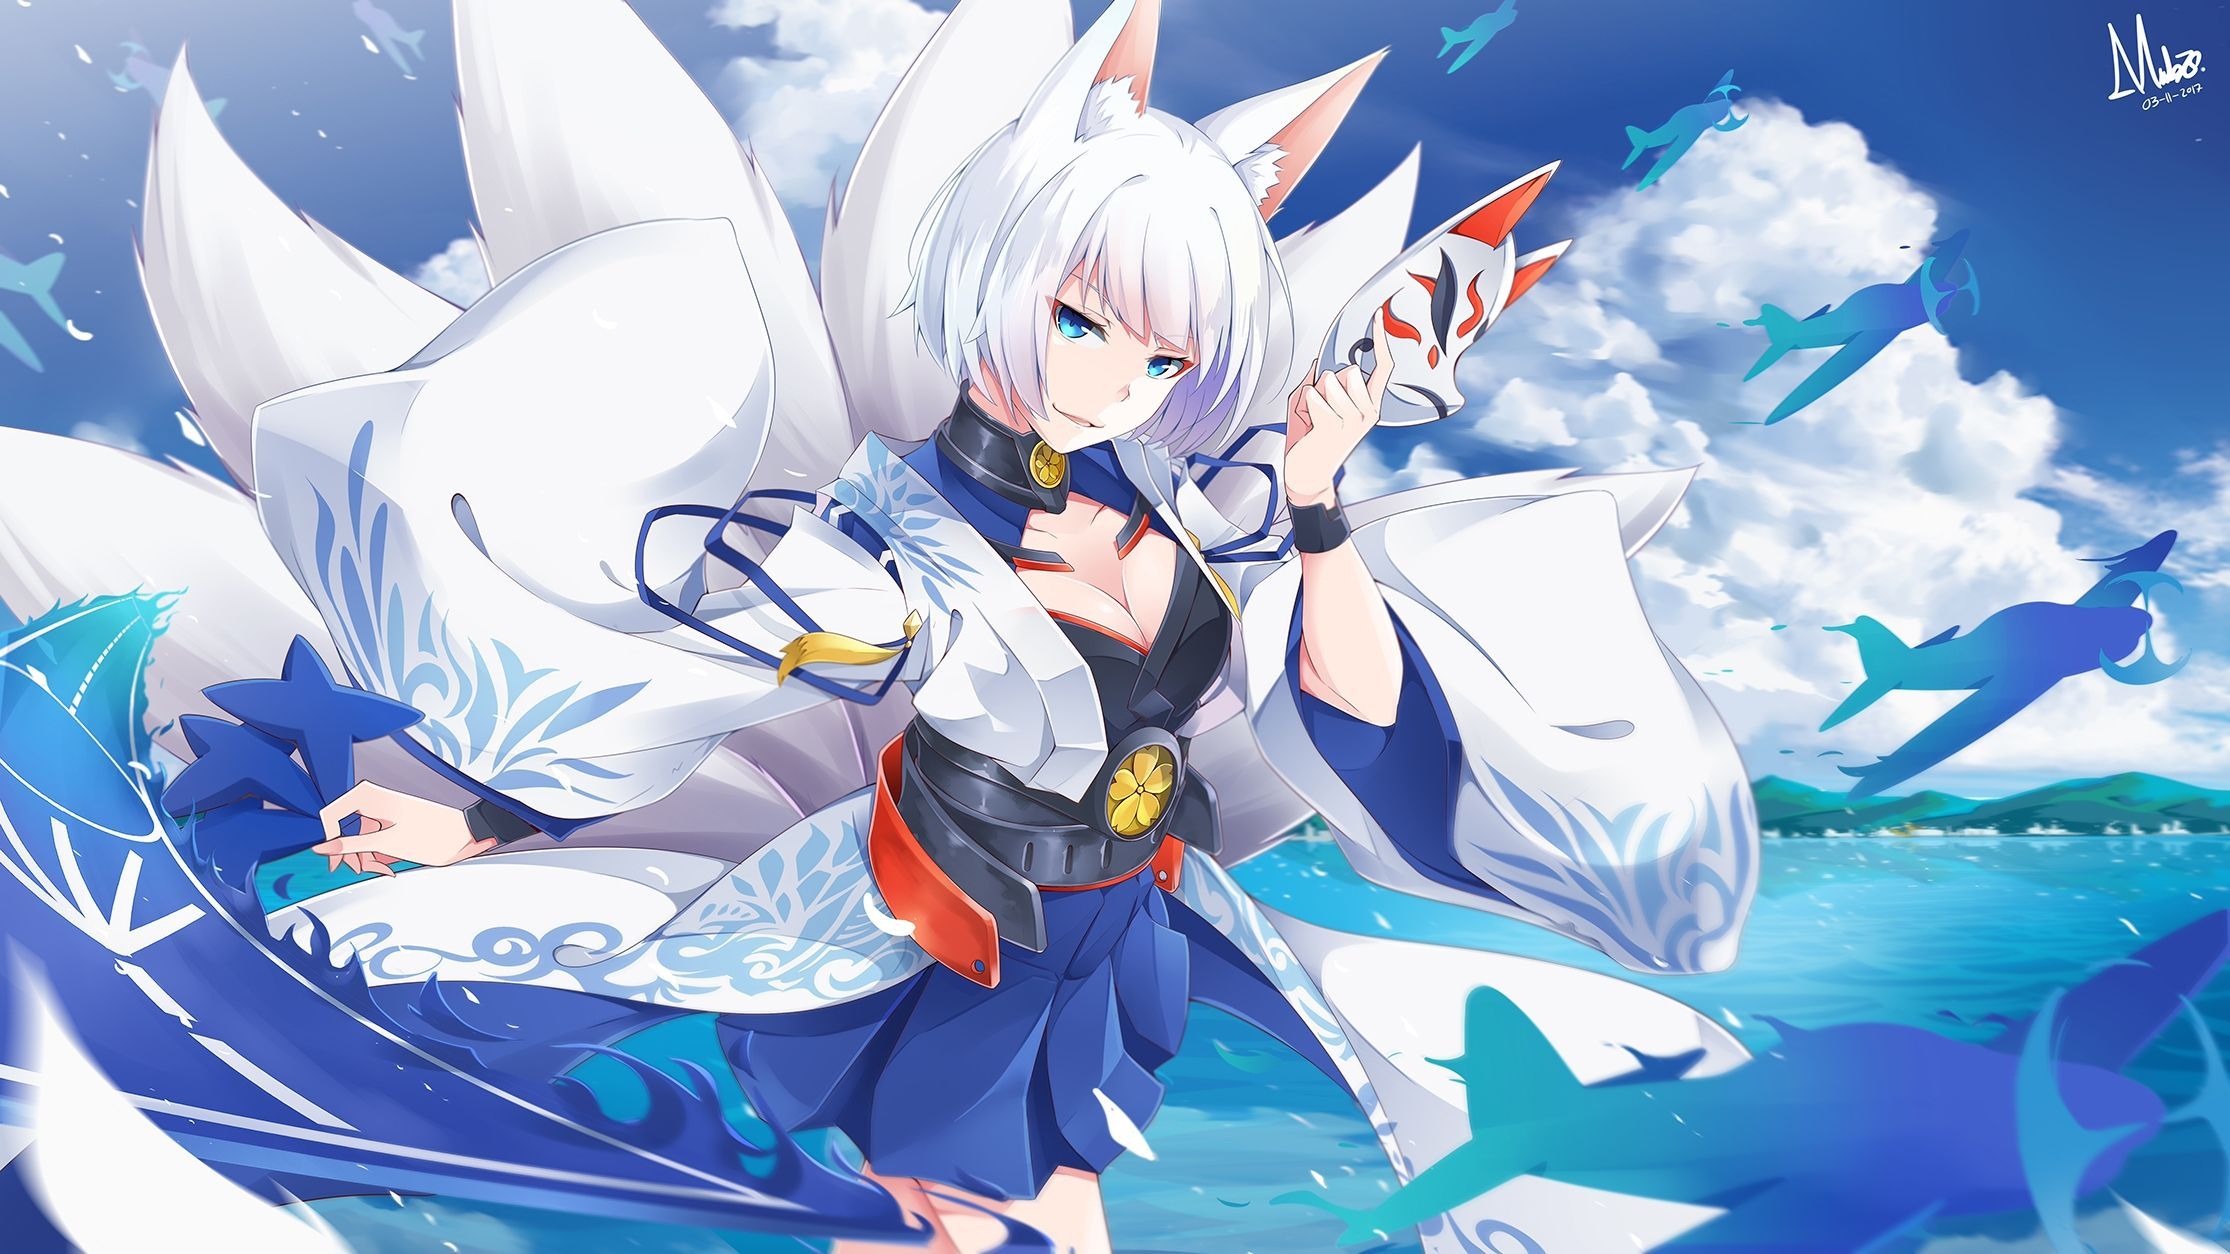 Blue-haired chibi anime girl with fox ears and tail - wide 7